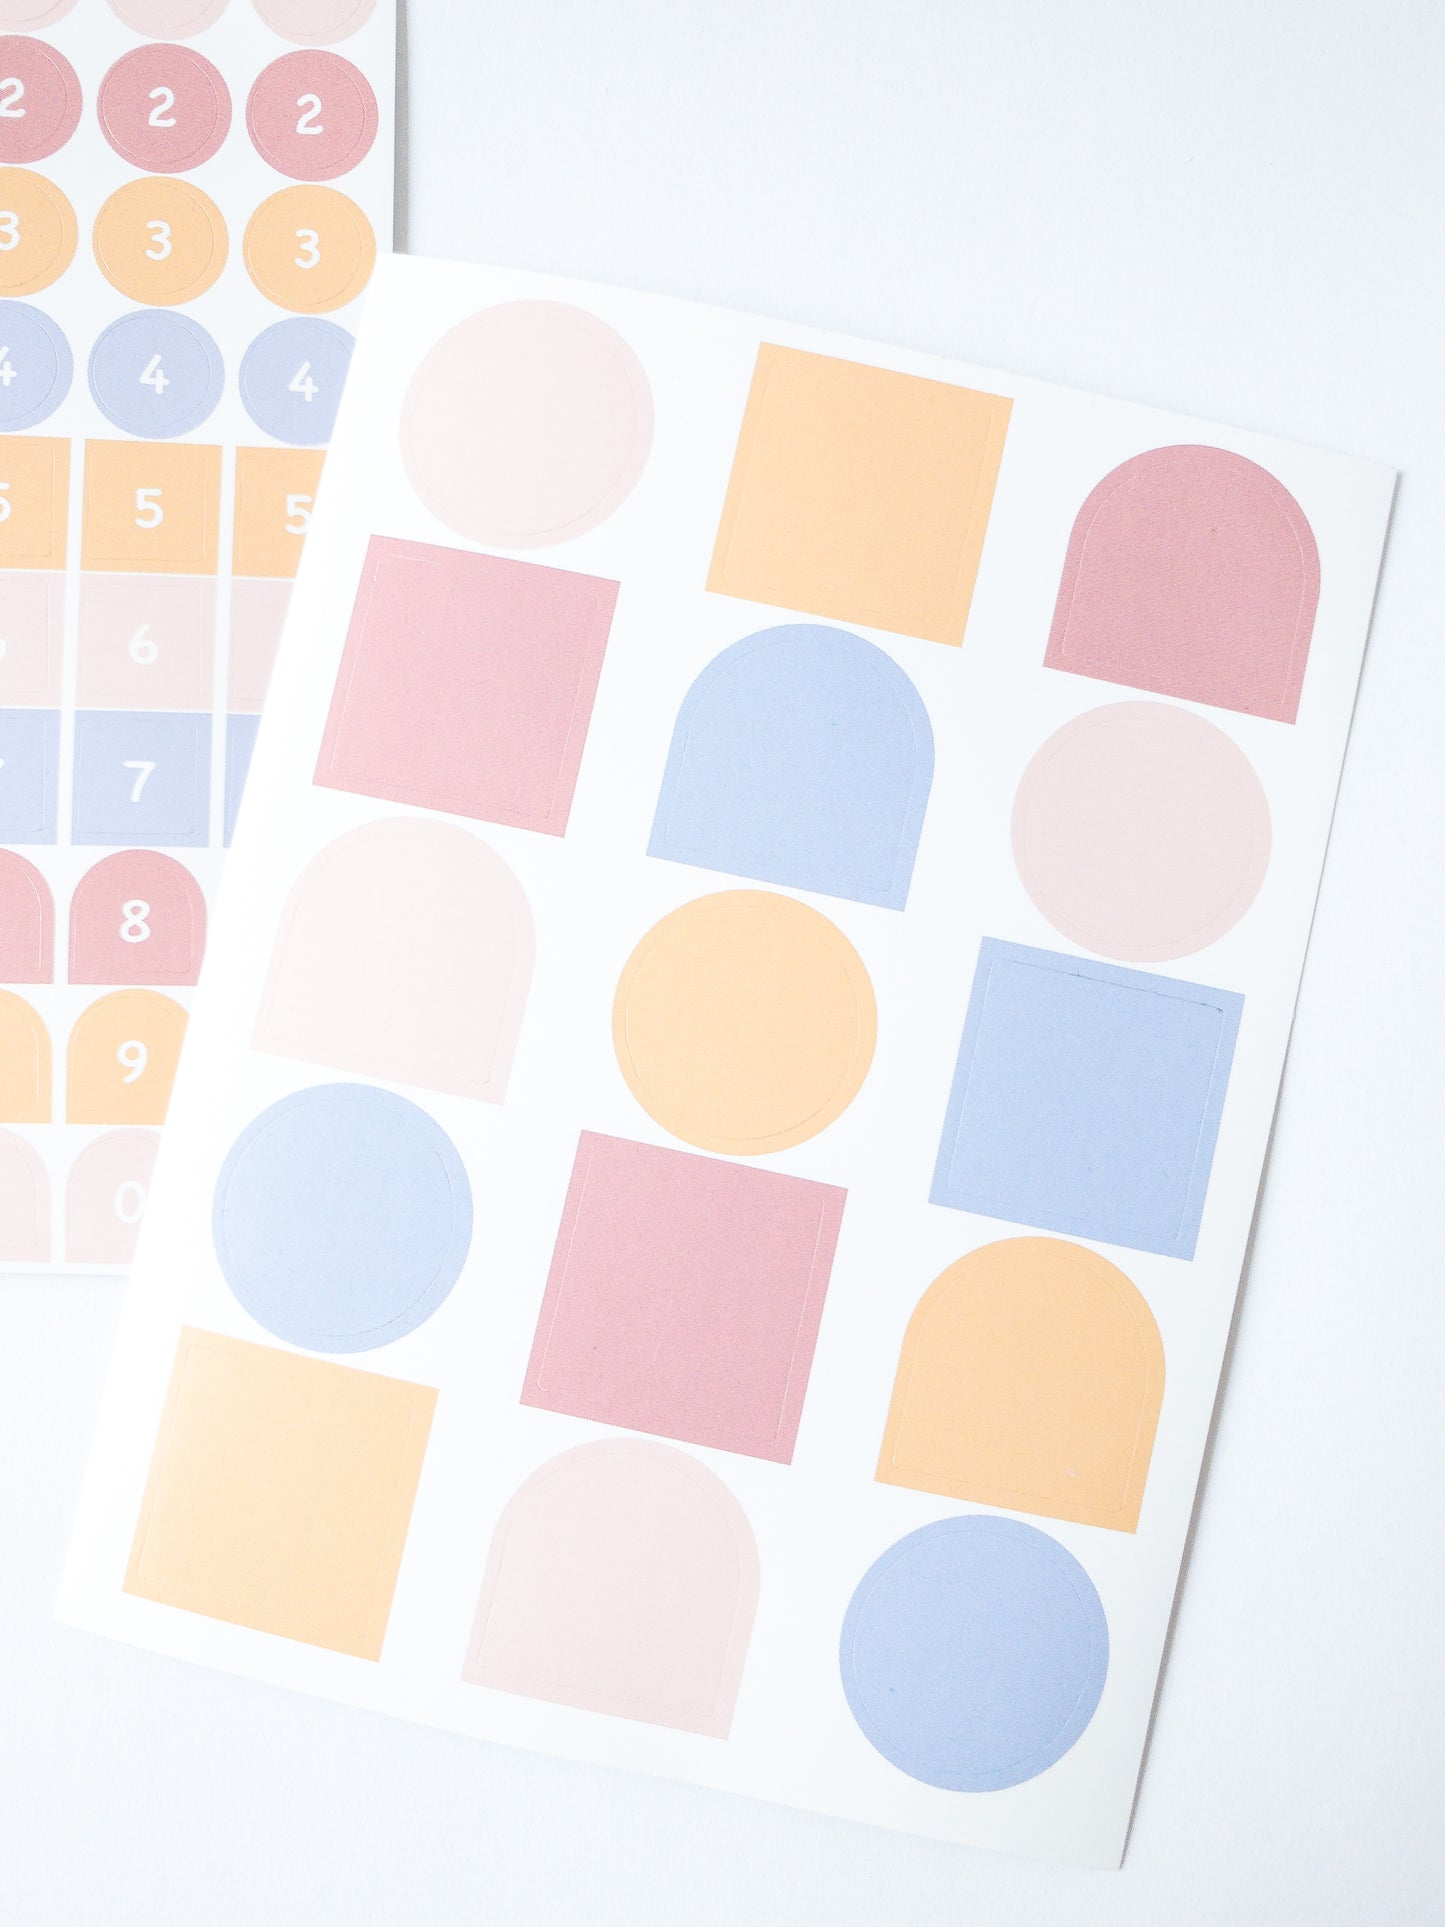 120 Korean style stickers! Three sheets of shapes and numbers in pretty pastel colors. There are 70 mini number stickers, 35 medium-sized shape stickers and 15 large shape stickers.